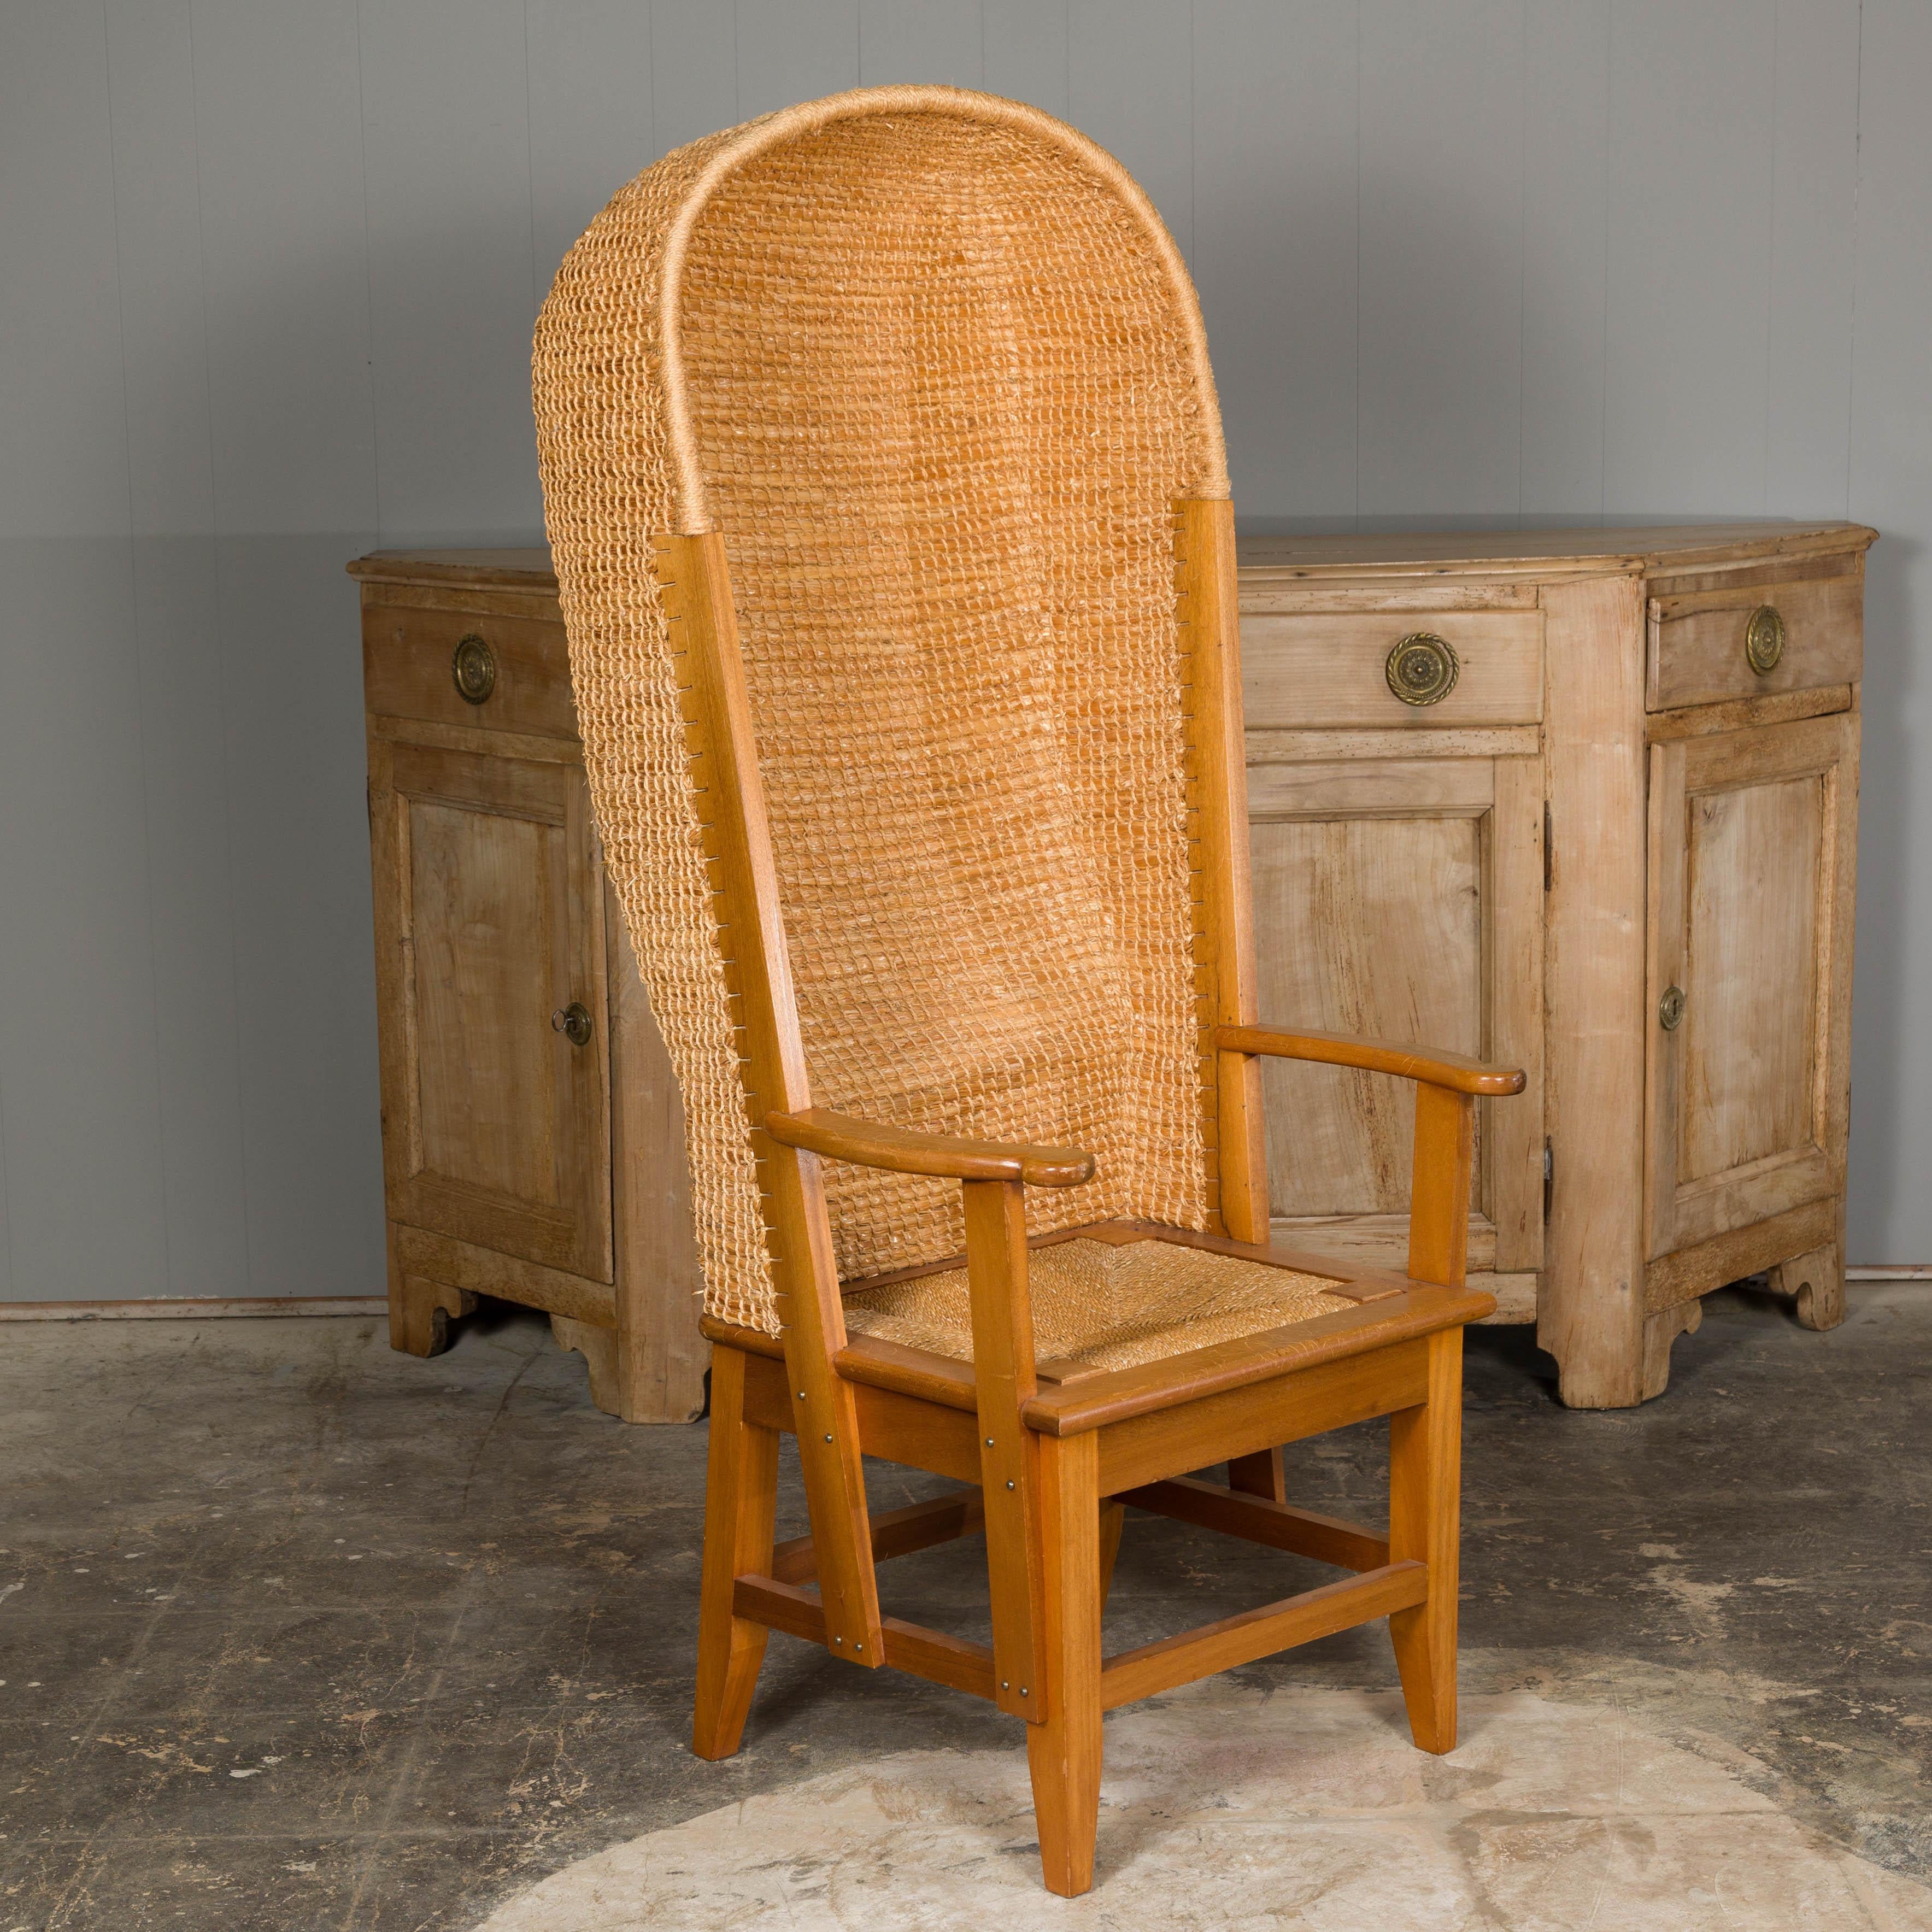 Orkney Island Midcentury Scottish Canopy Chair with Hand Woven Straw Back For Sale 2